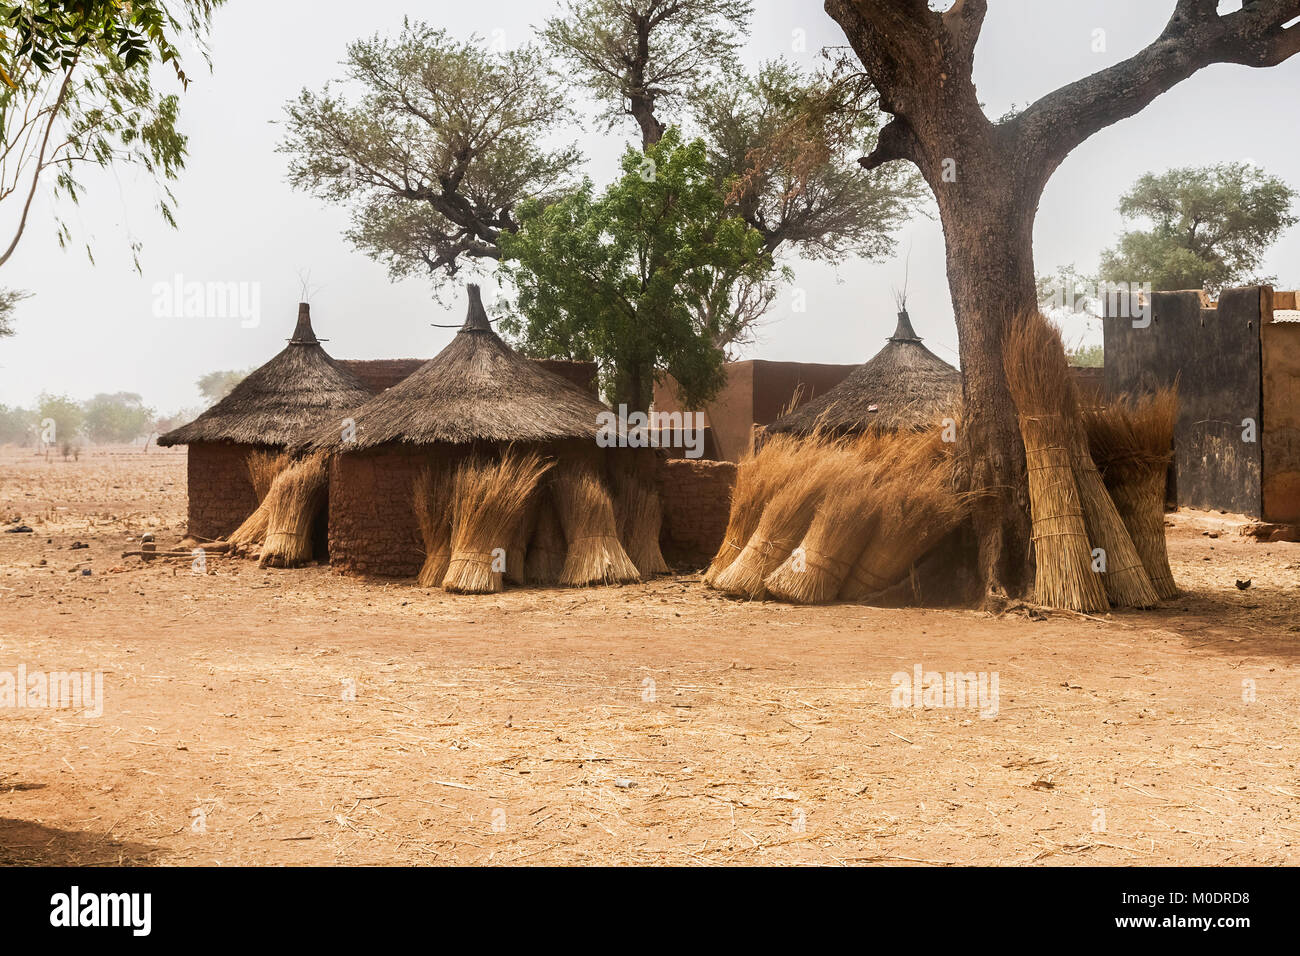 Traditional huts in a mosi village of Burkina Faso with some bundles of straw their circular walls. Stock Photo